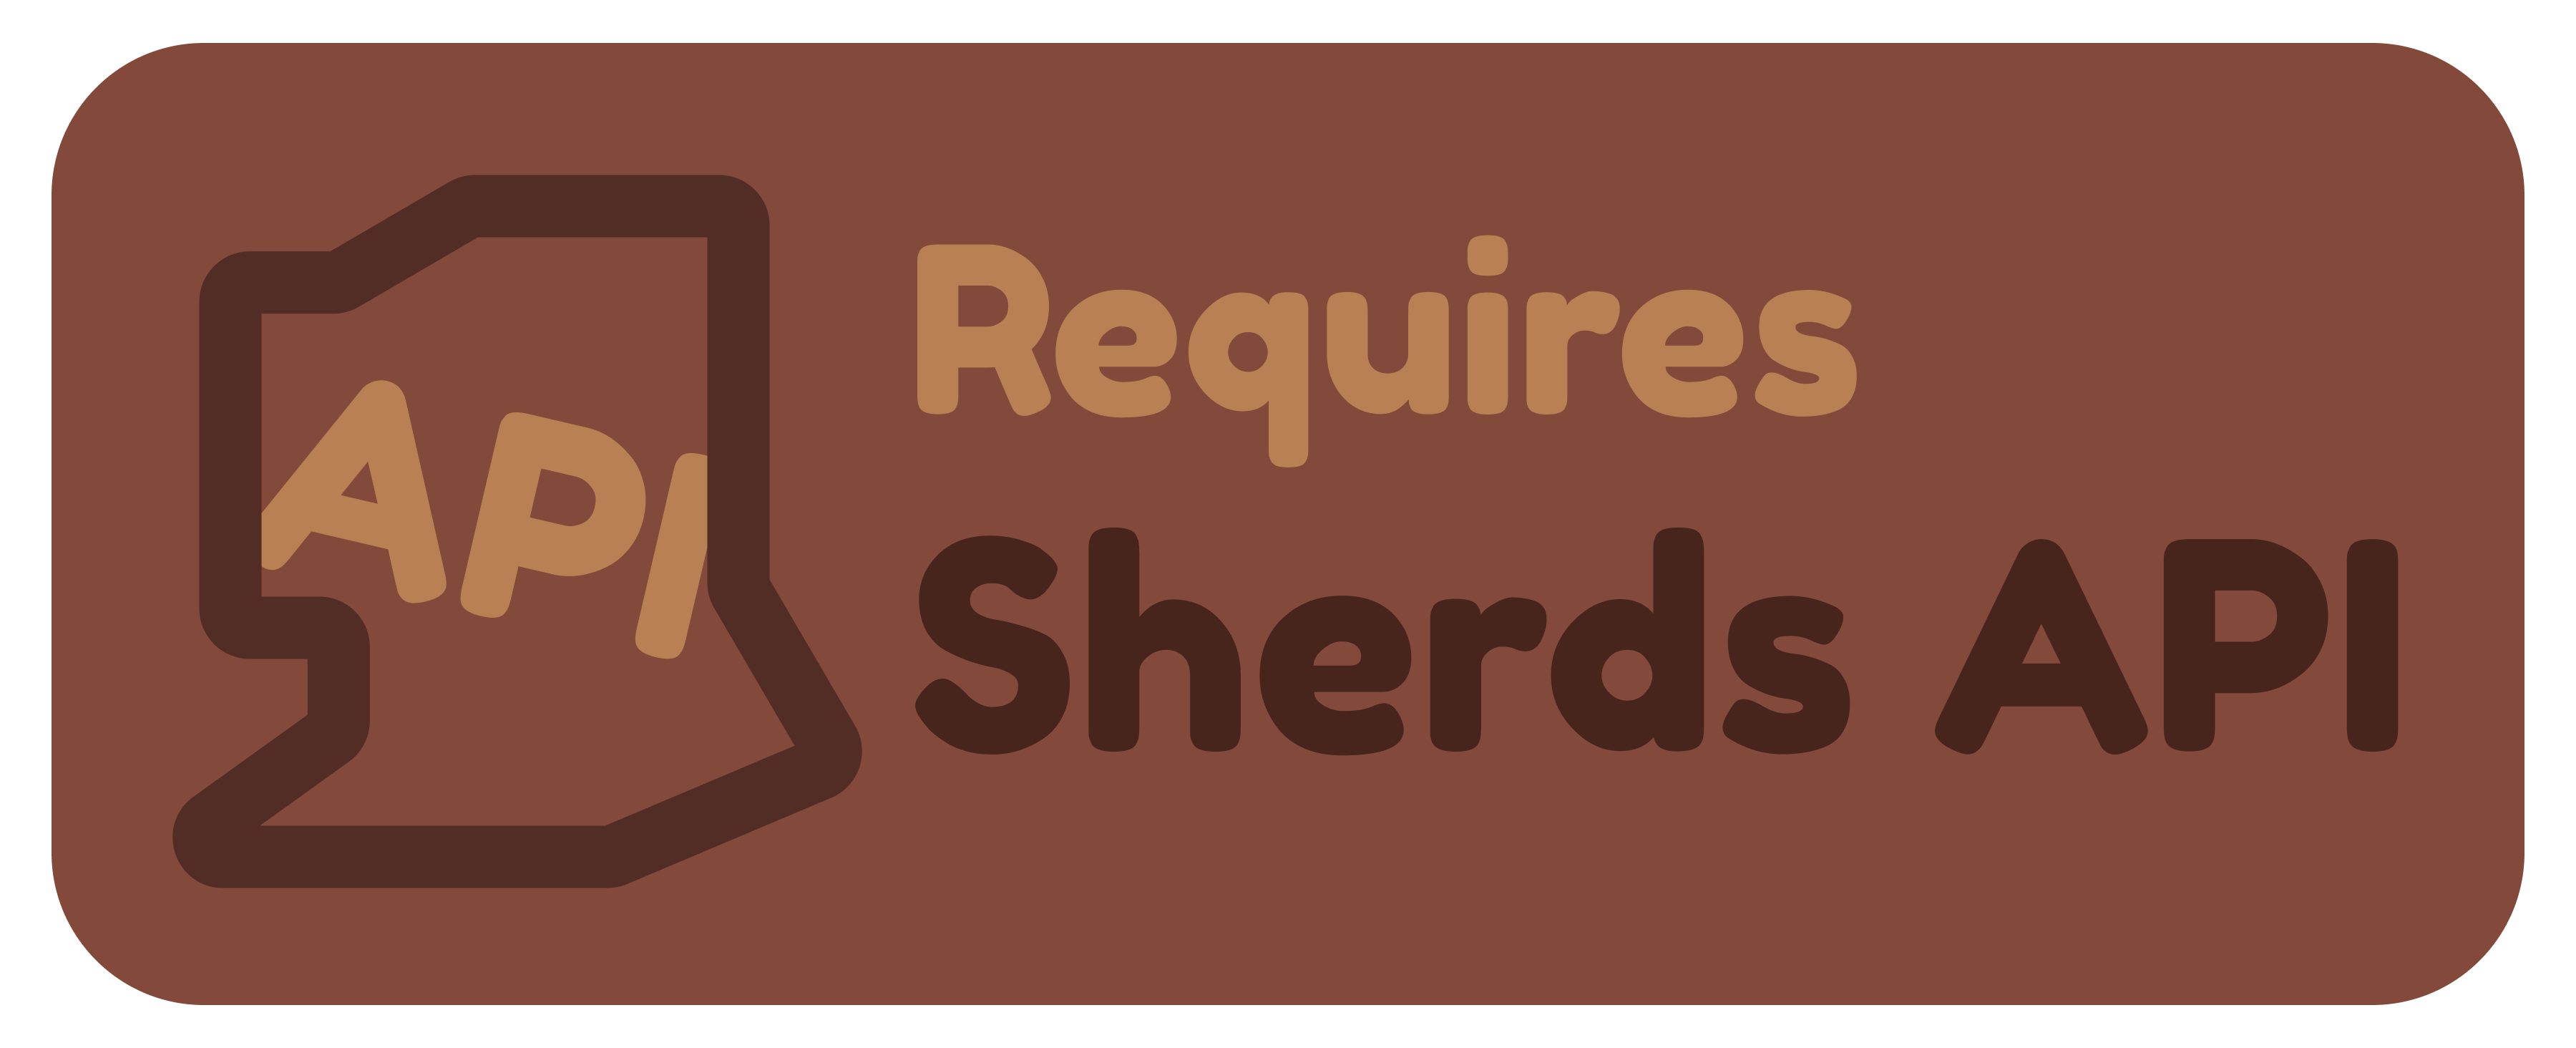 'Requires Sherds API' badge